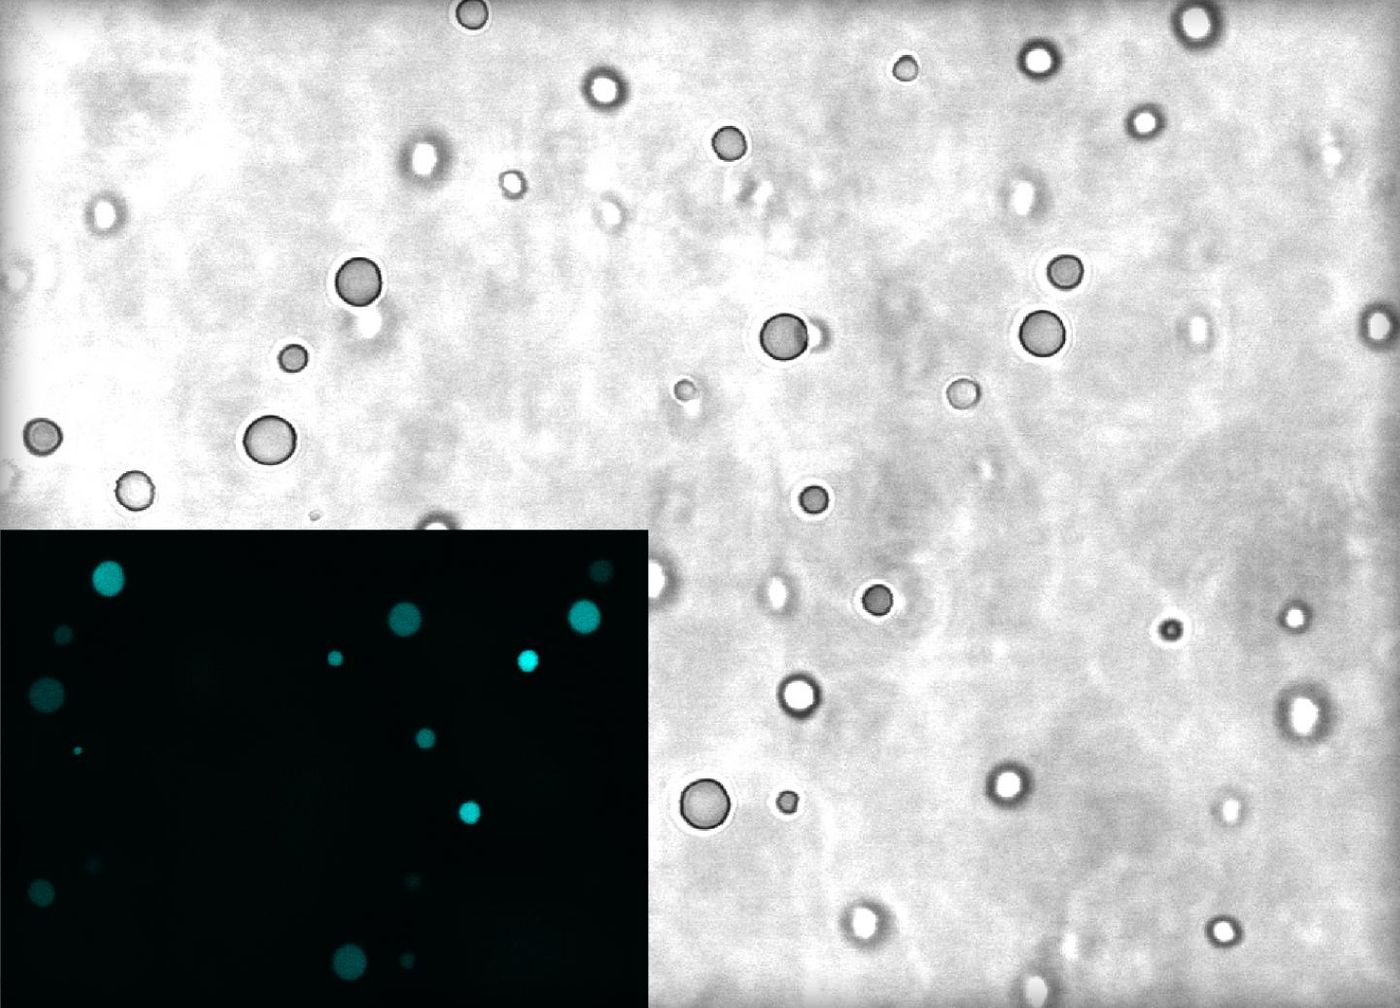 The Image shows droplets of complex coacervates as seen under a microscope. The inset shows RNA molecules (cyan) are highly concentrated inside the droplets compared to the surrounding (dark). At roughly 2-5 micrometers in diameter, the droplets are about 14-35 times thinner than human hair. / Credit: Bevilacqua Laboratory, Penn State